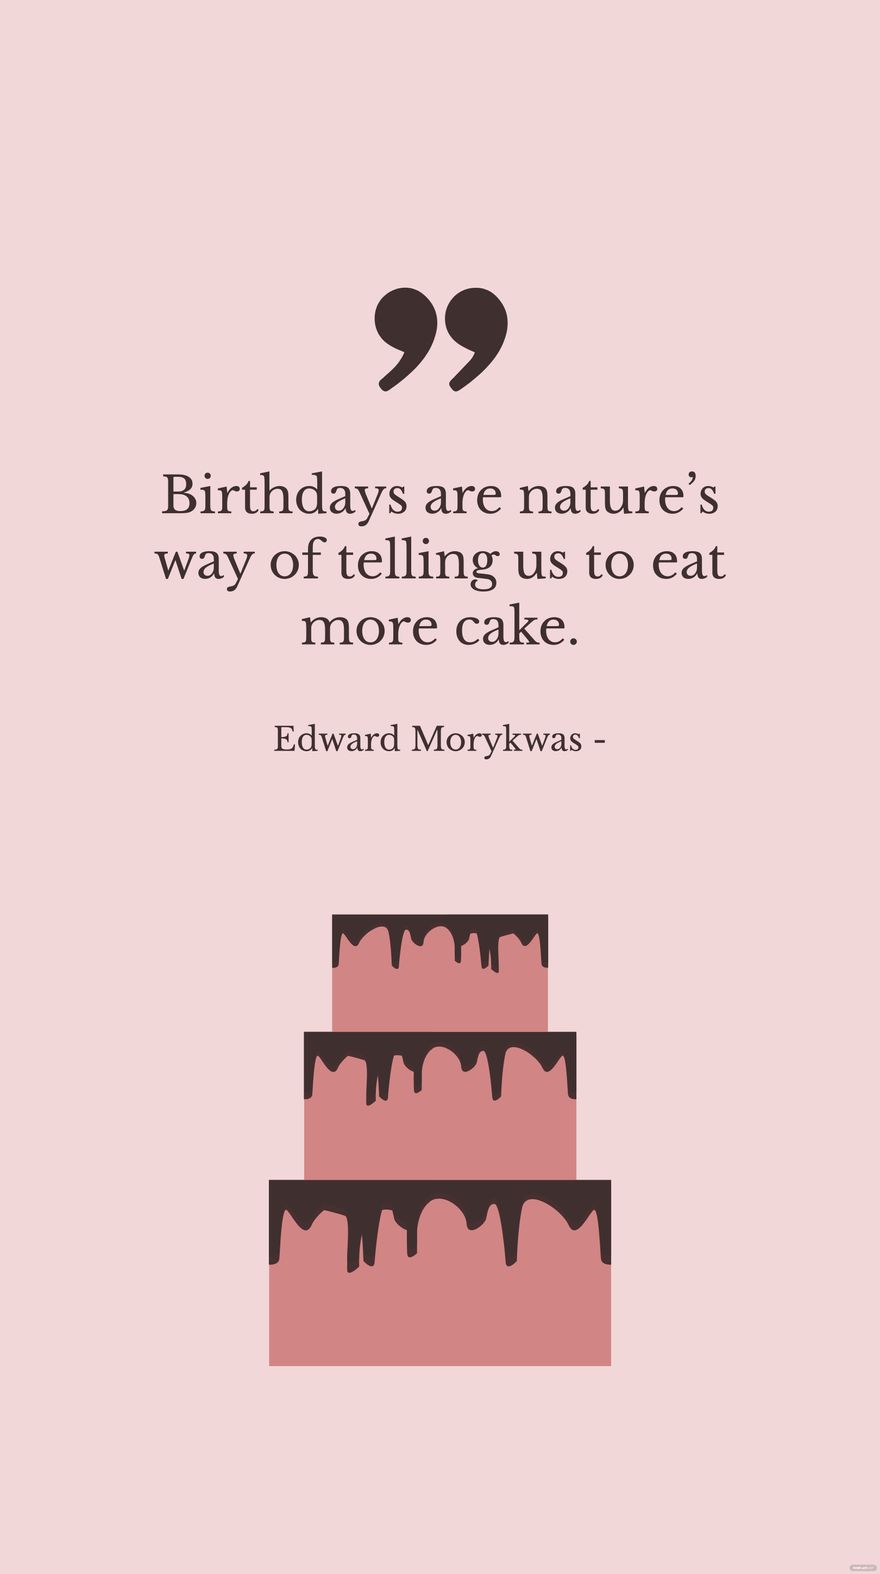 Edward Morykwas - Birthdays are nature’s way of telling us to eat more cake.